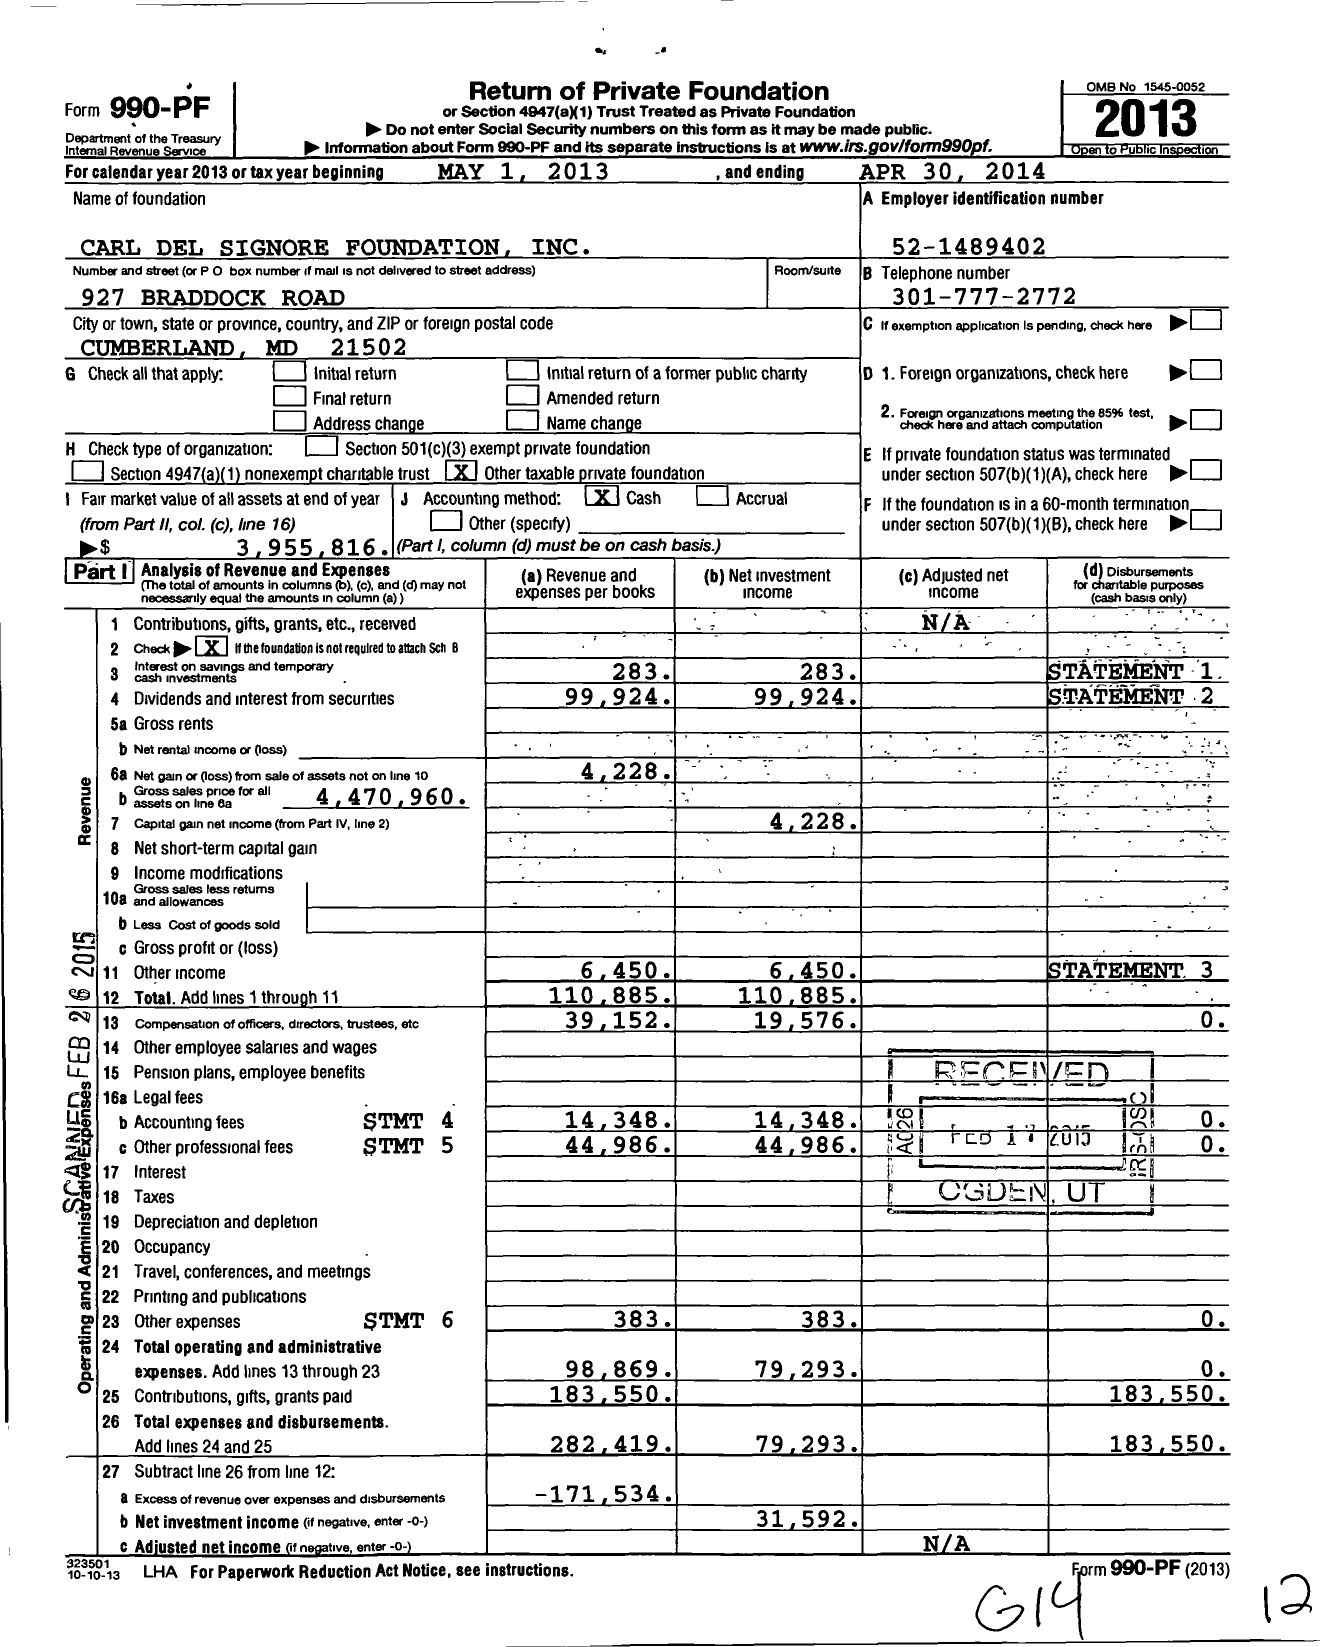 Image of first page of 2013 Form 990PF for Carl Del Signore Foundation